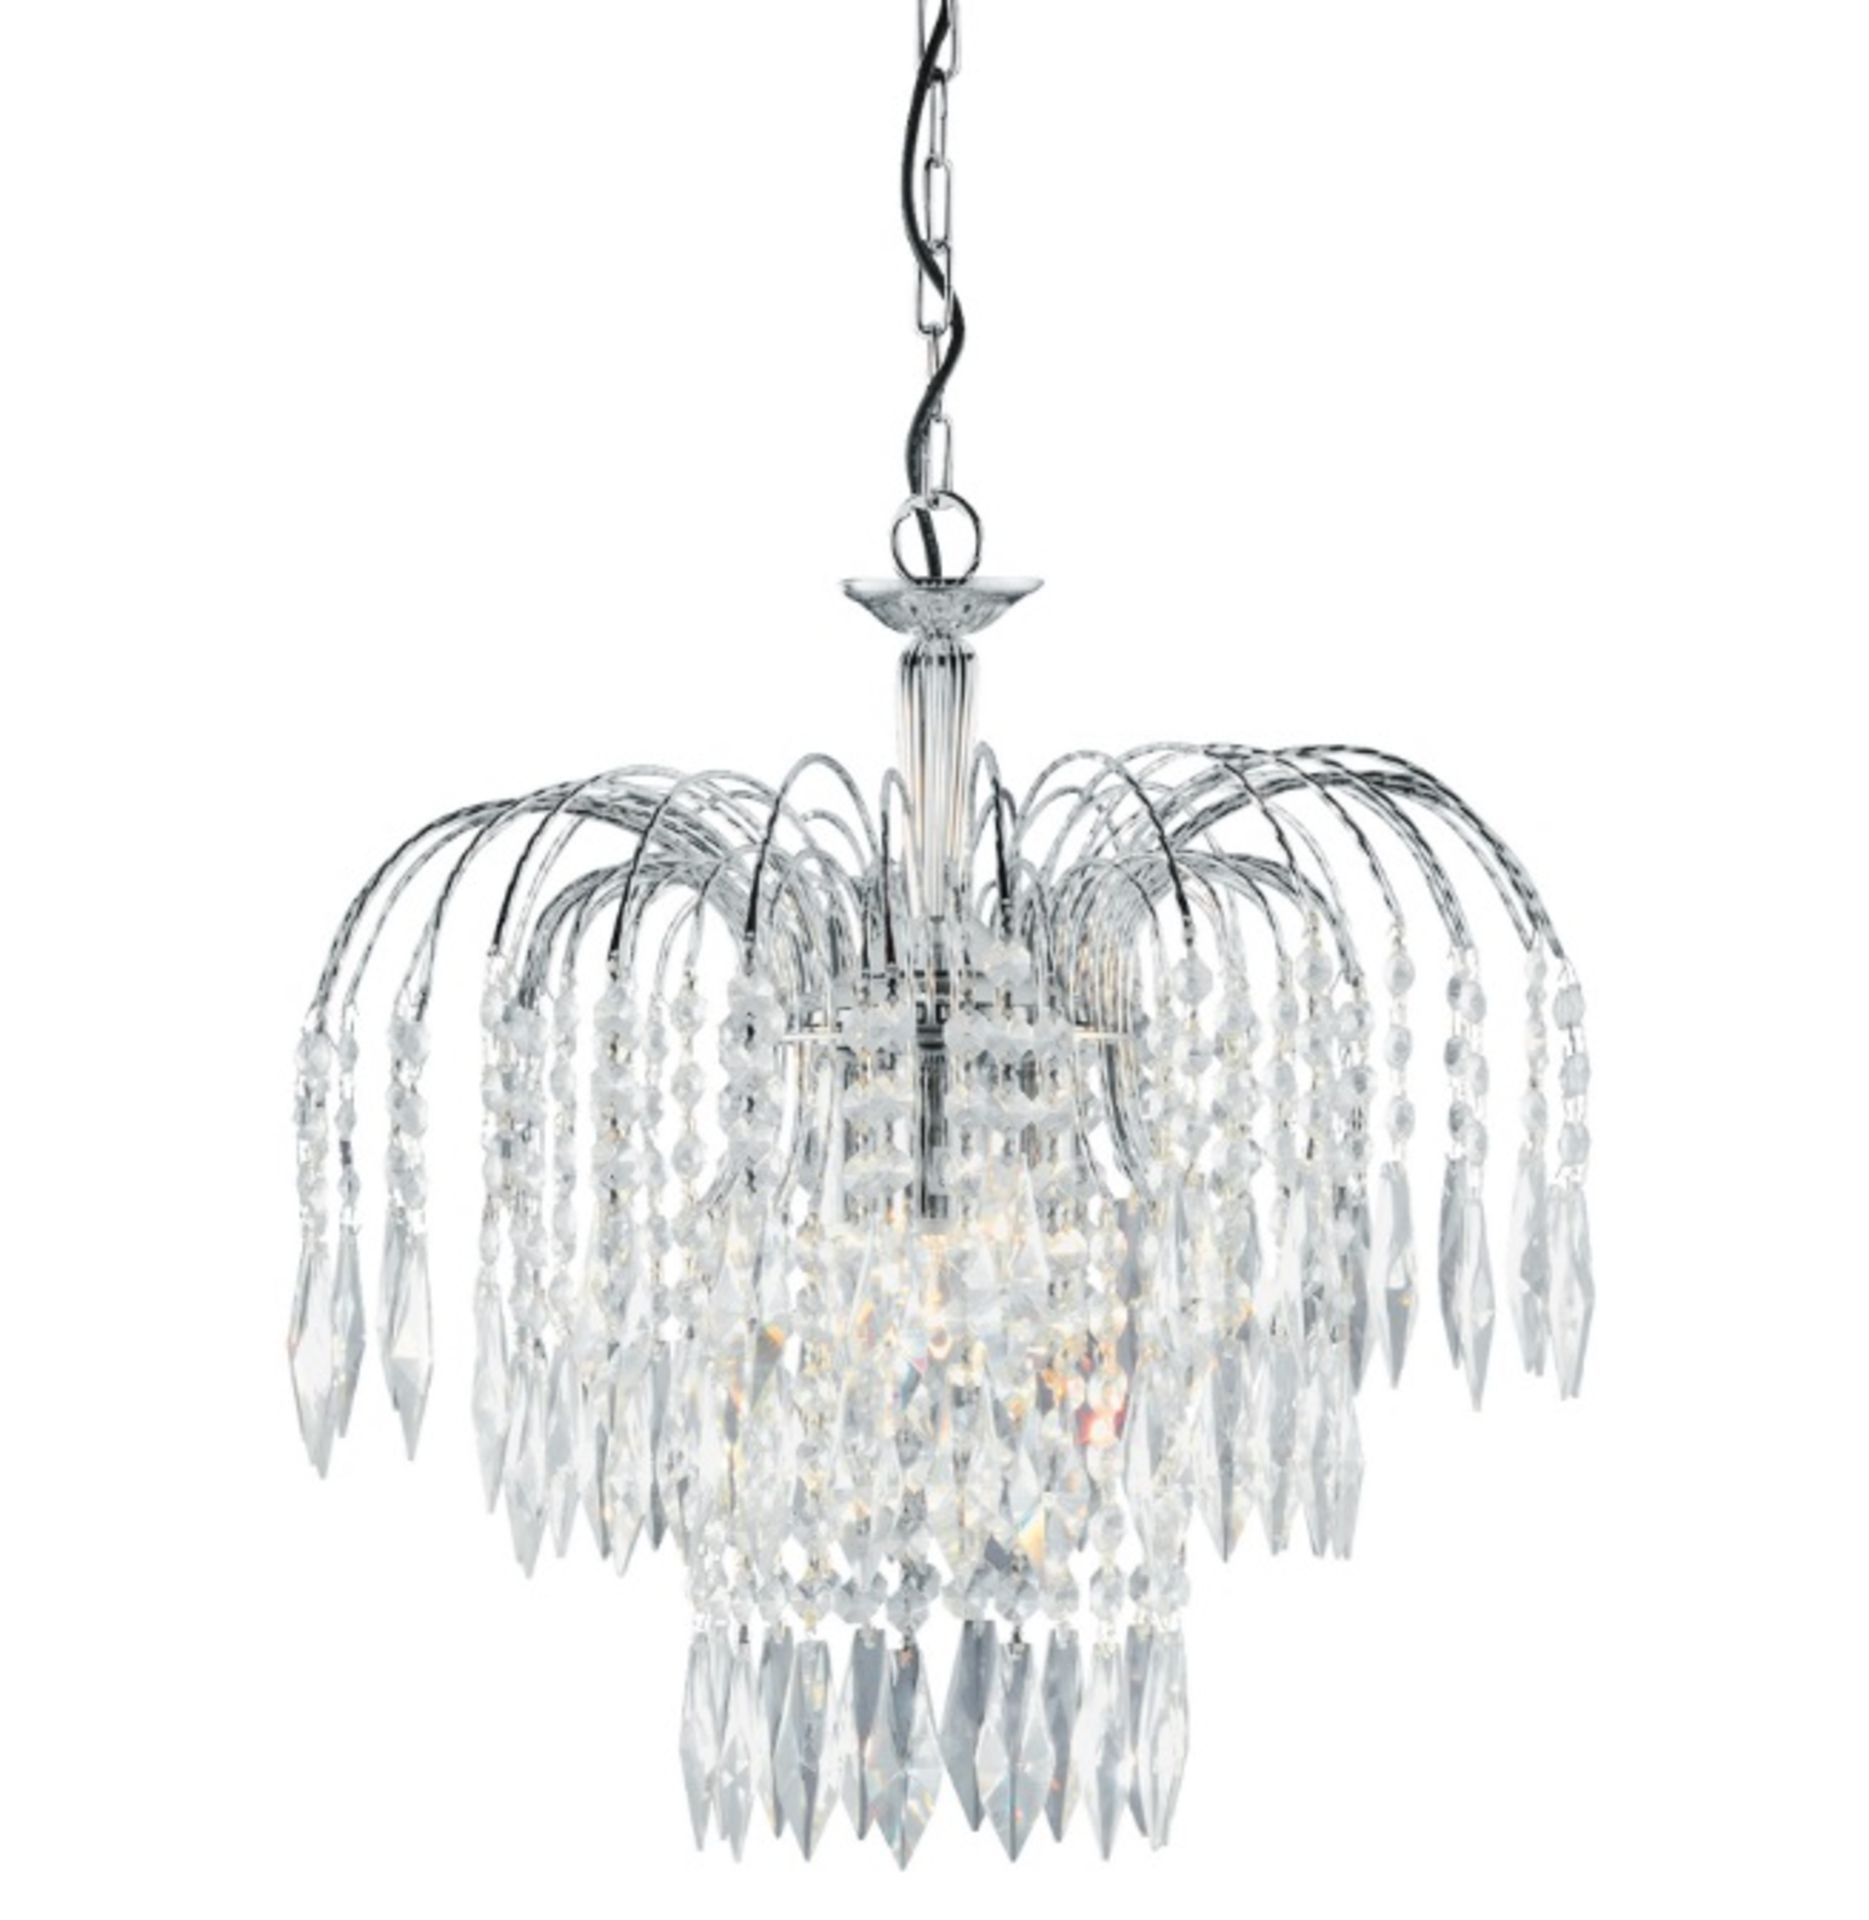 1 x WATERFALL Chrome 3-Light Ceiling Fitting With Crystal Button & Drops Decoration - RRP £256.80